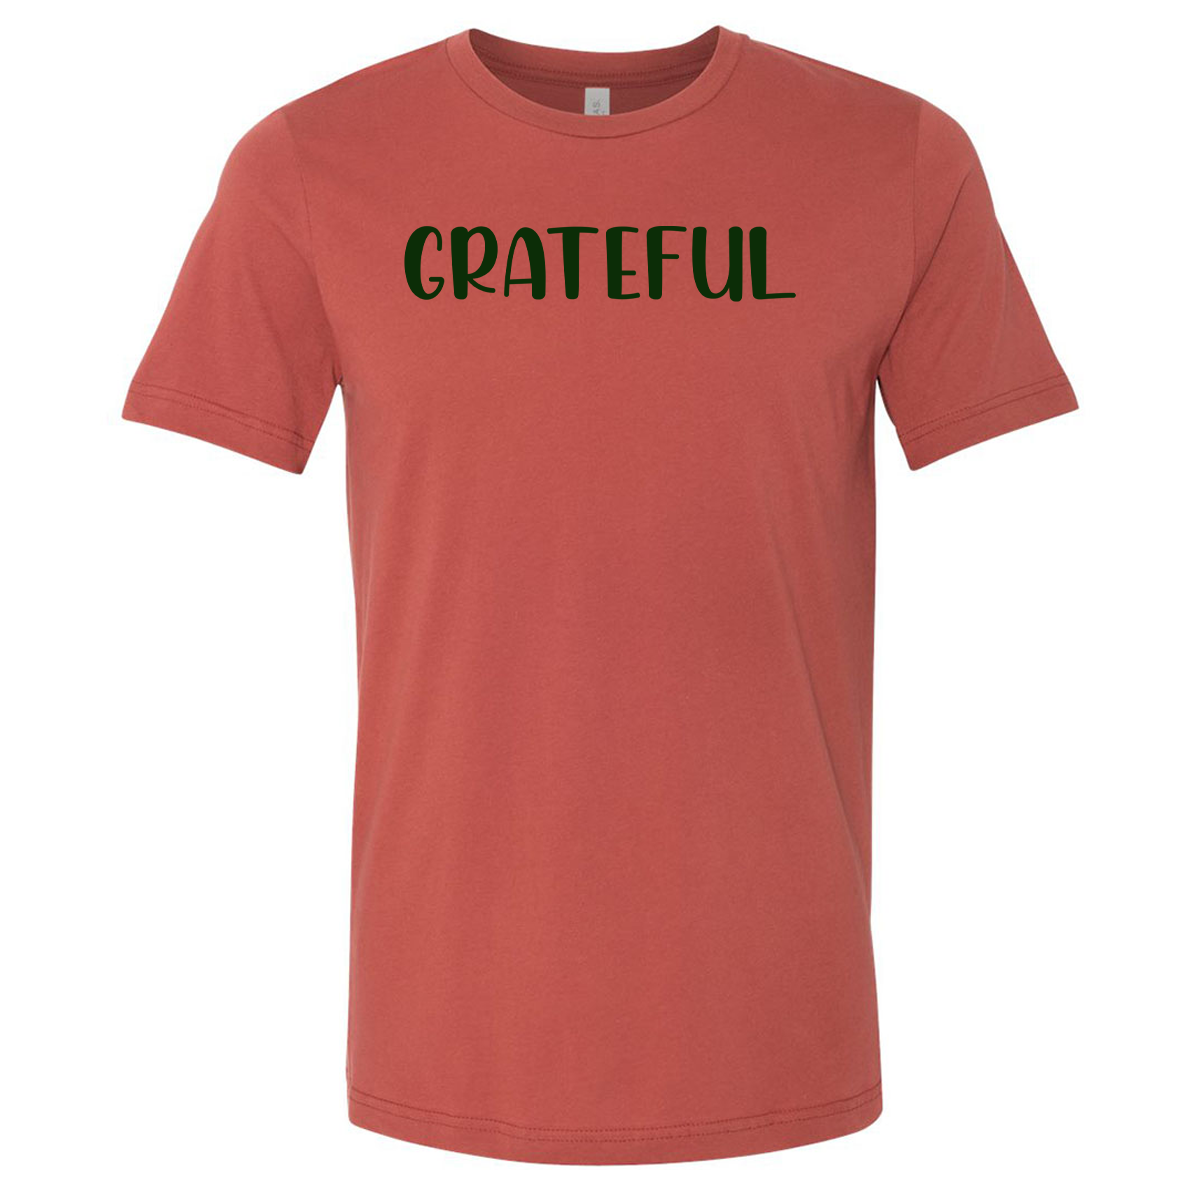 Grateful Tee - Southern Grace Creations